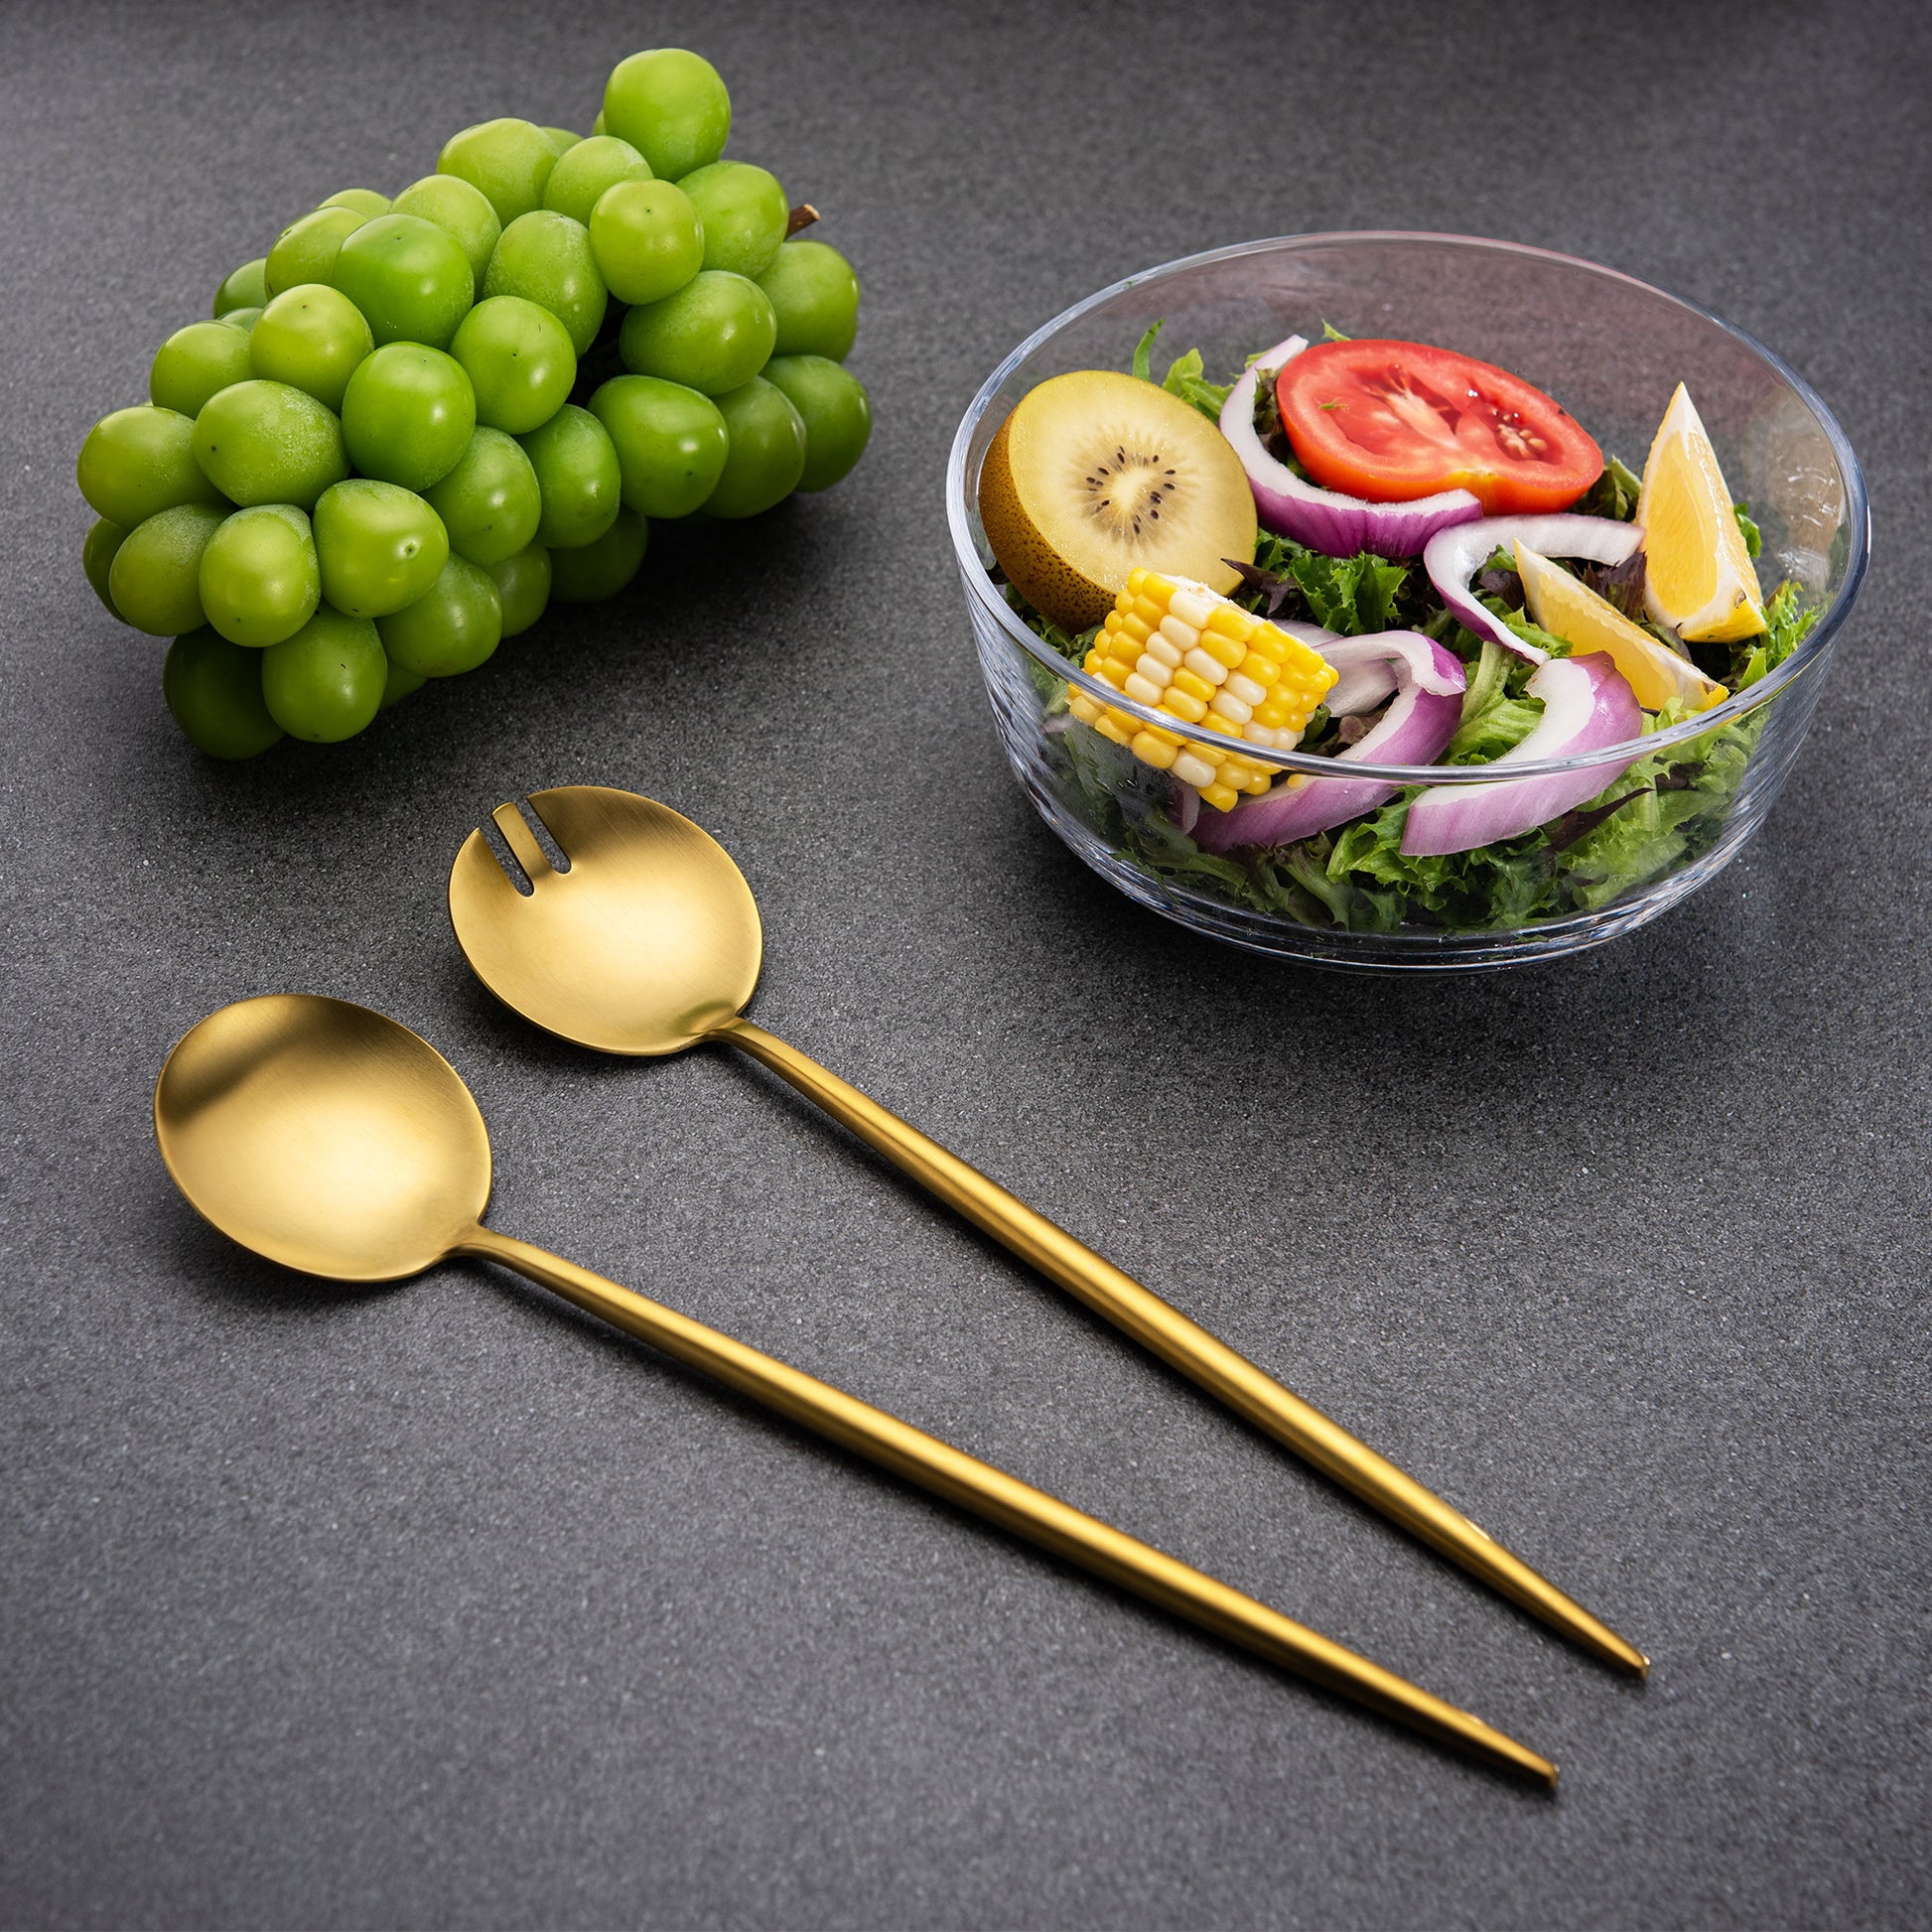 matte gold Serving Spoon Forks Serving Utensils Set Silverware Cake Cutter spatula salad kitchenware gift christmas birthday sustainable cylinder box recyclable FDA approved cubiertos de acero inoxidable accessories hosting essentials Christmas xmas eating utensils juegos de vajilla utensilios de cocina modernos juego de platos de cocina modernos serveware servewear dad gifts ideas for women fathers day mothers day anniversary at home home party gifts for new homeowners fda approved